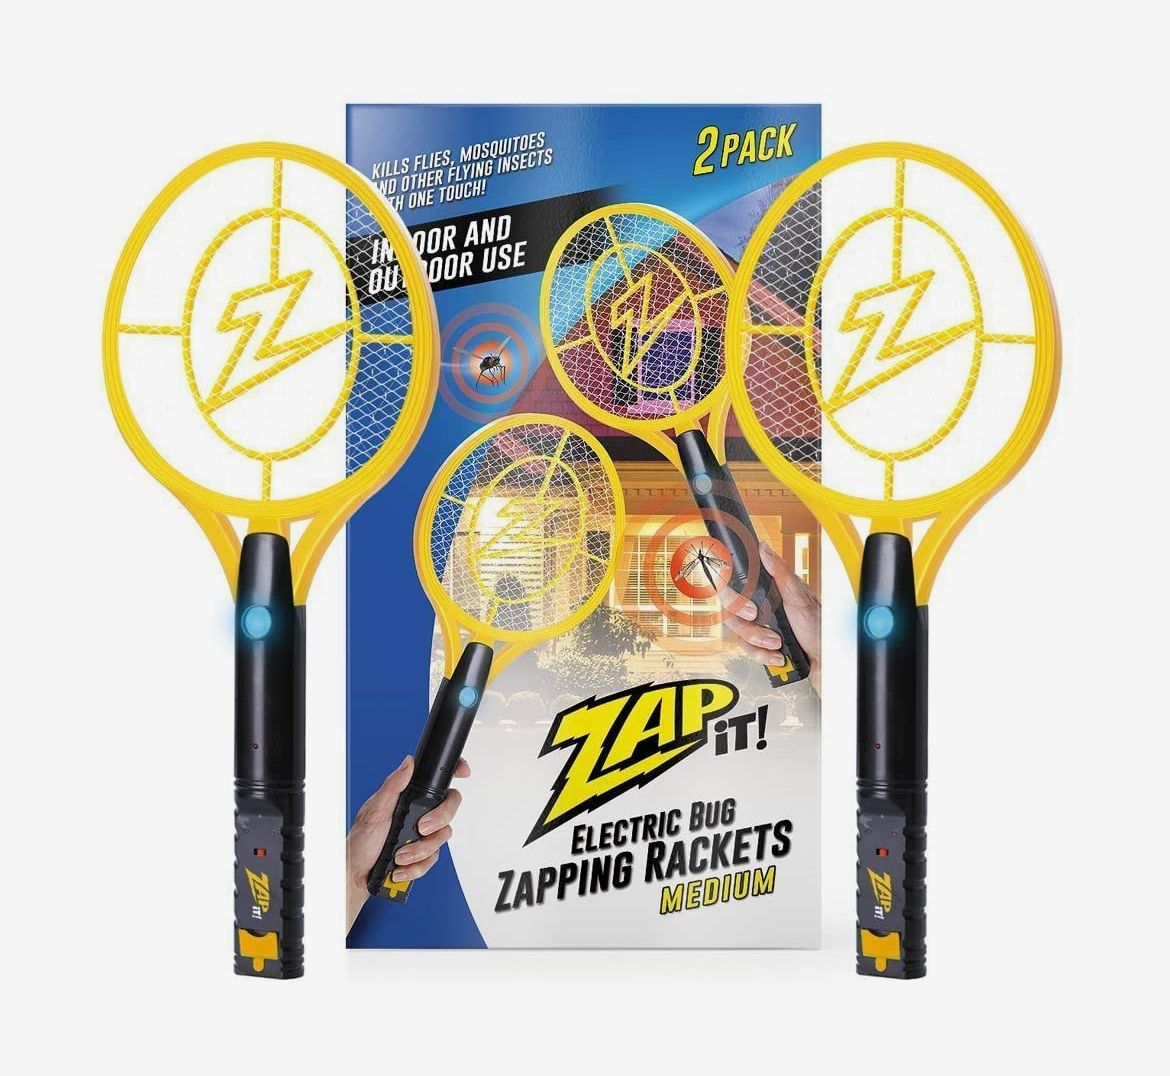 Yellow Bug Zapper,Rechargeable Electric Mosquito Swatter with LED Light,2 Pack of Insect Killers,Household Rechargeable Mosquito Racket,Flyswatter For Home/School/Outdoor